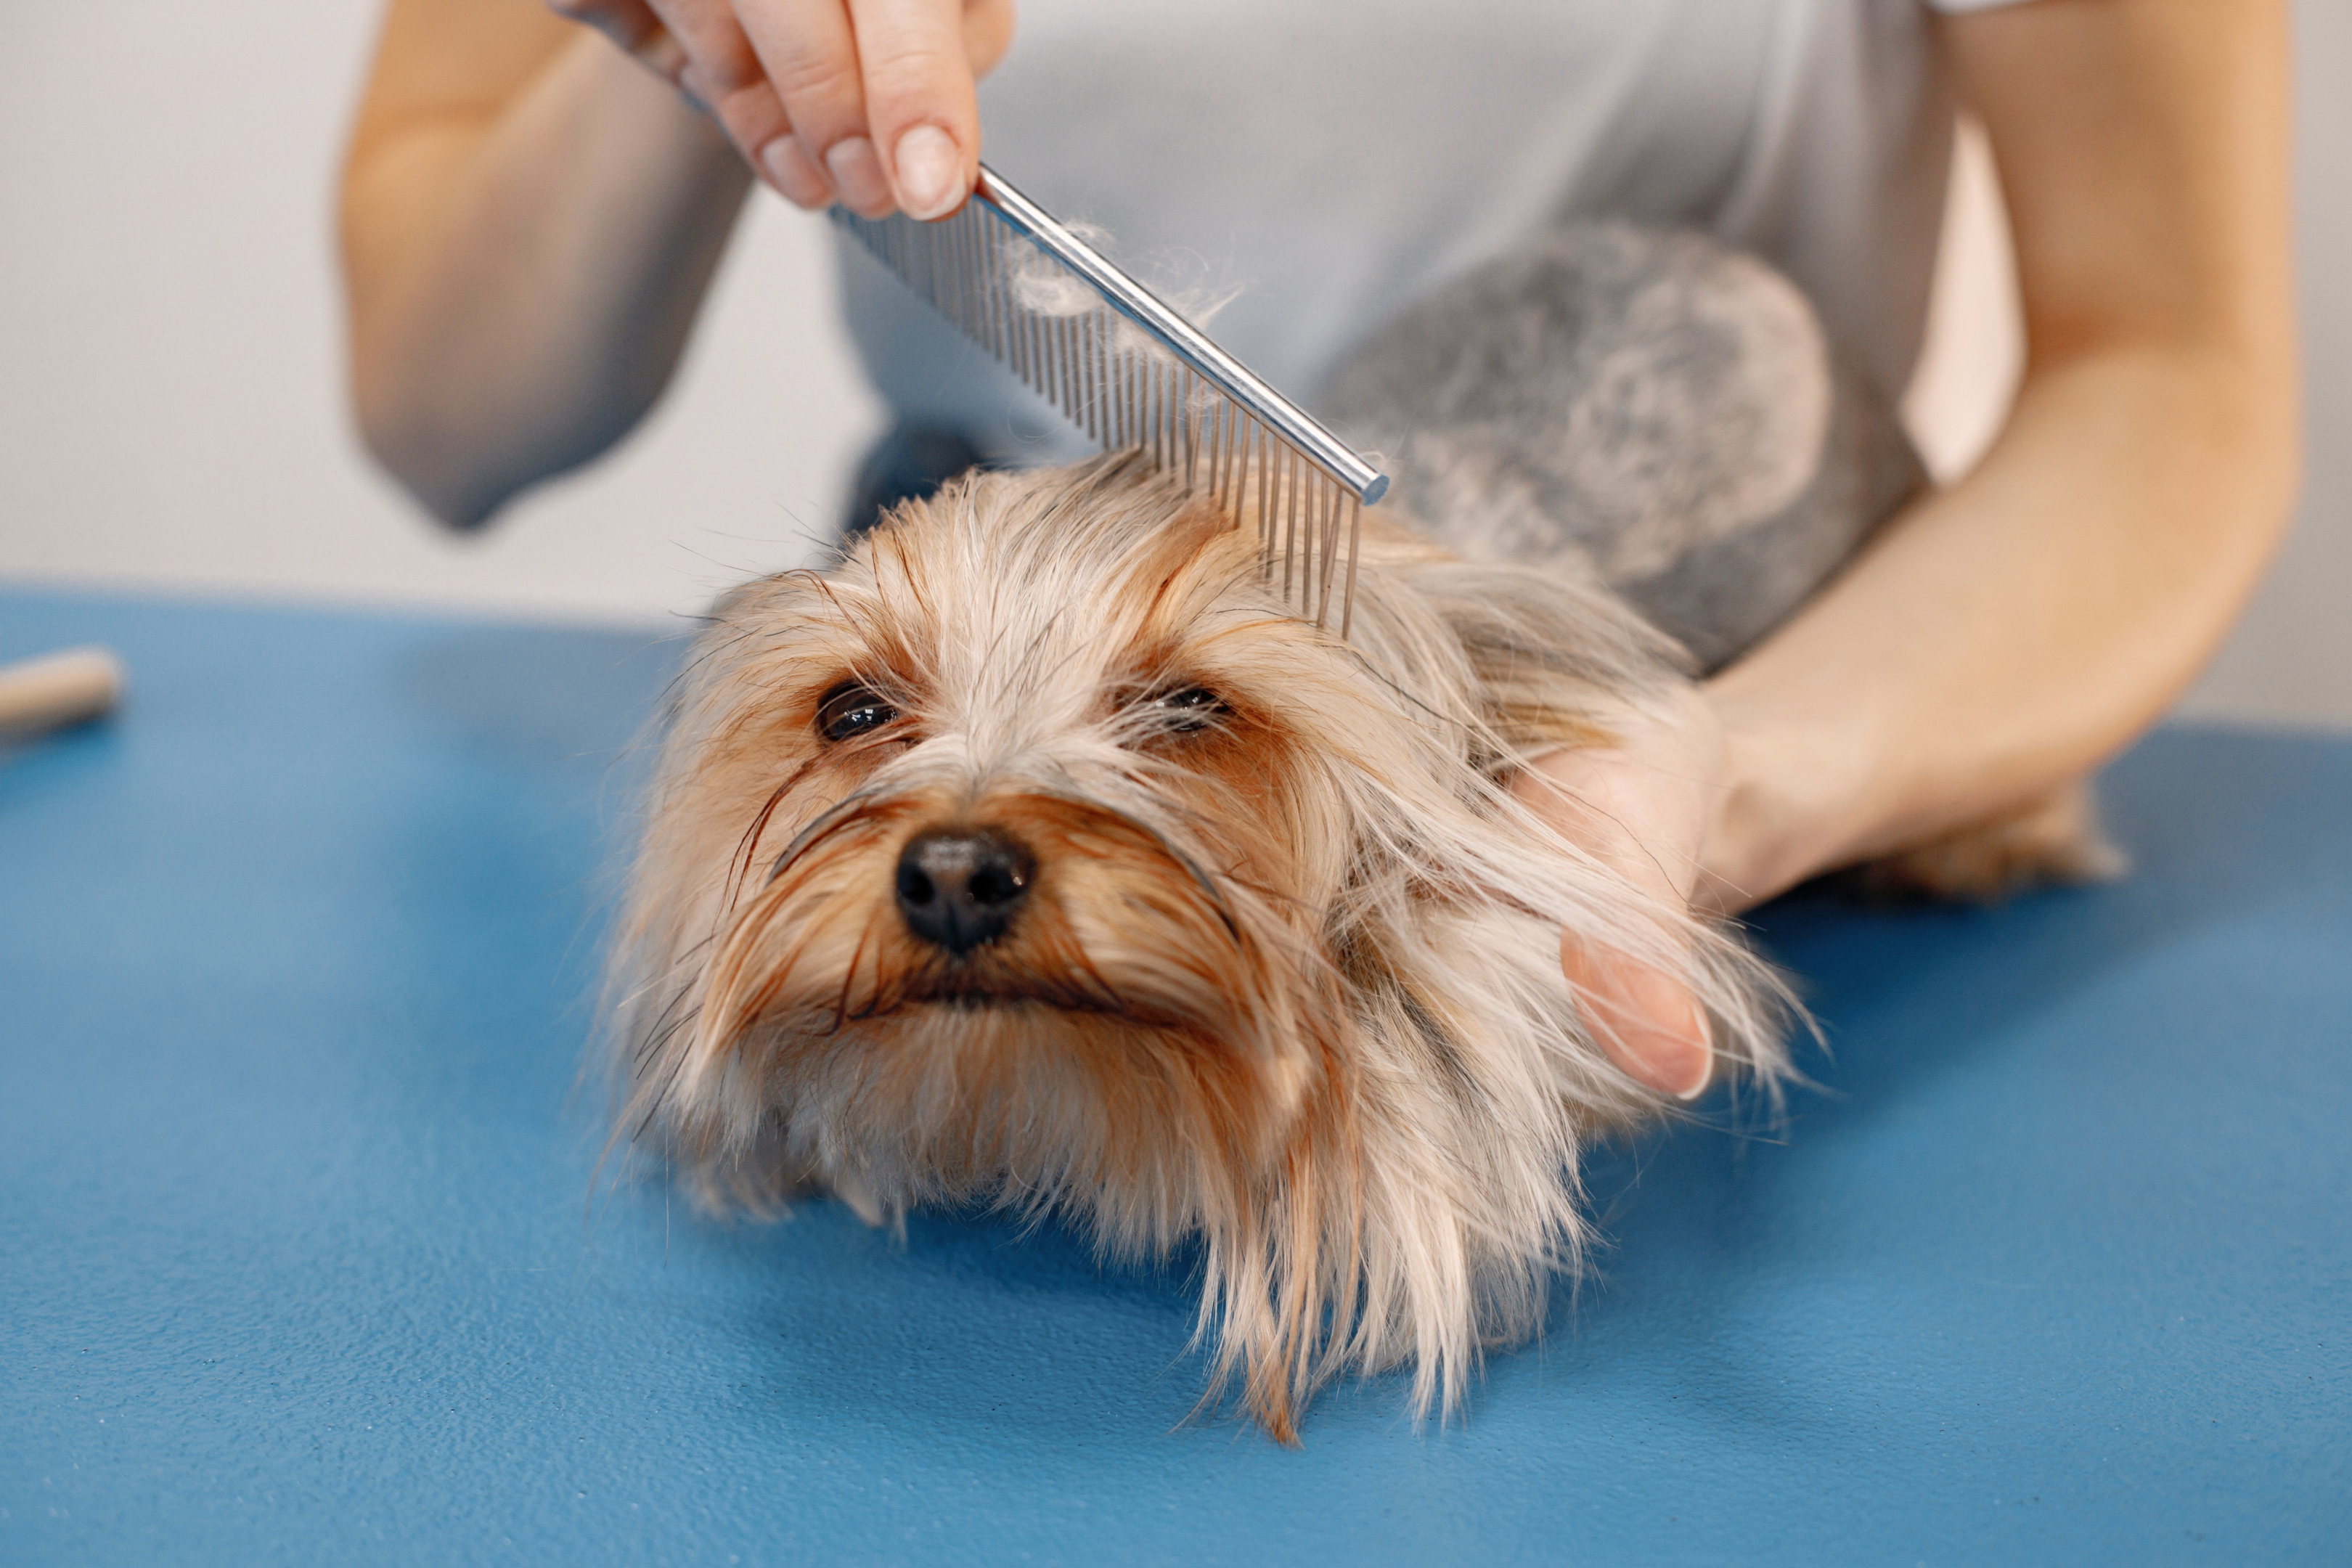 dog owners, prevent matting, grooming clippers